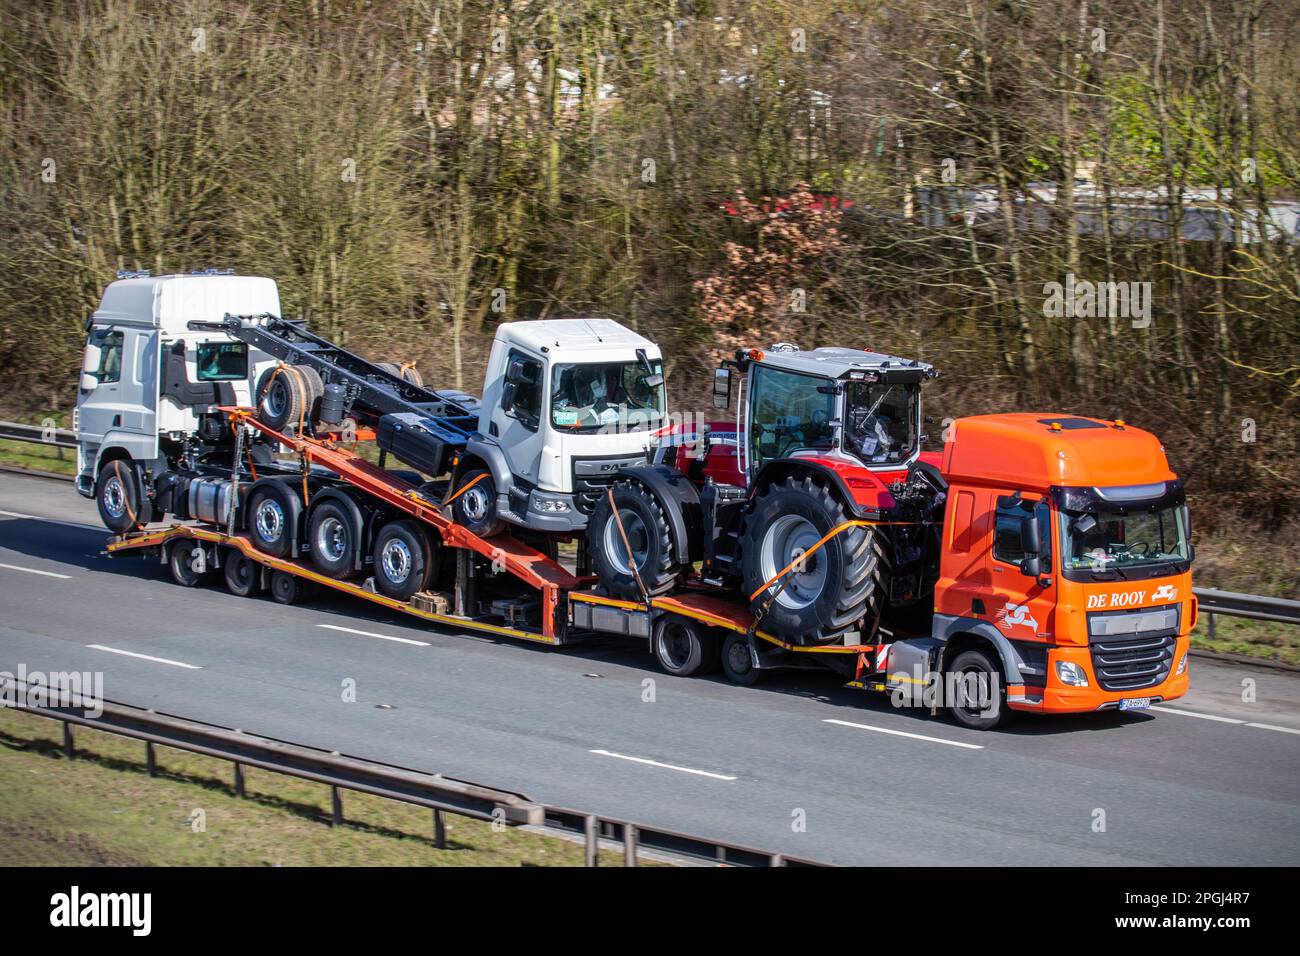 De Rooy Leyland Haulage delivery trucks, lorry, transportation, truck, cargo carrier, new DAF tractor units, European commercial transport, industry, M61 at Manchester, UK Stock Photo